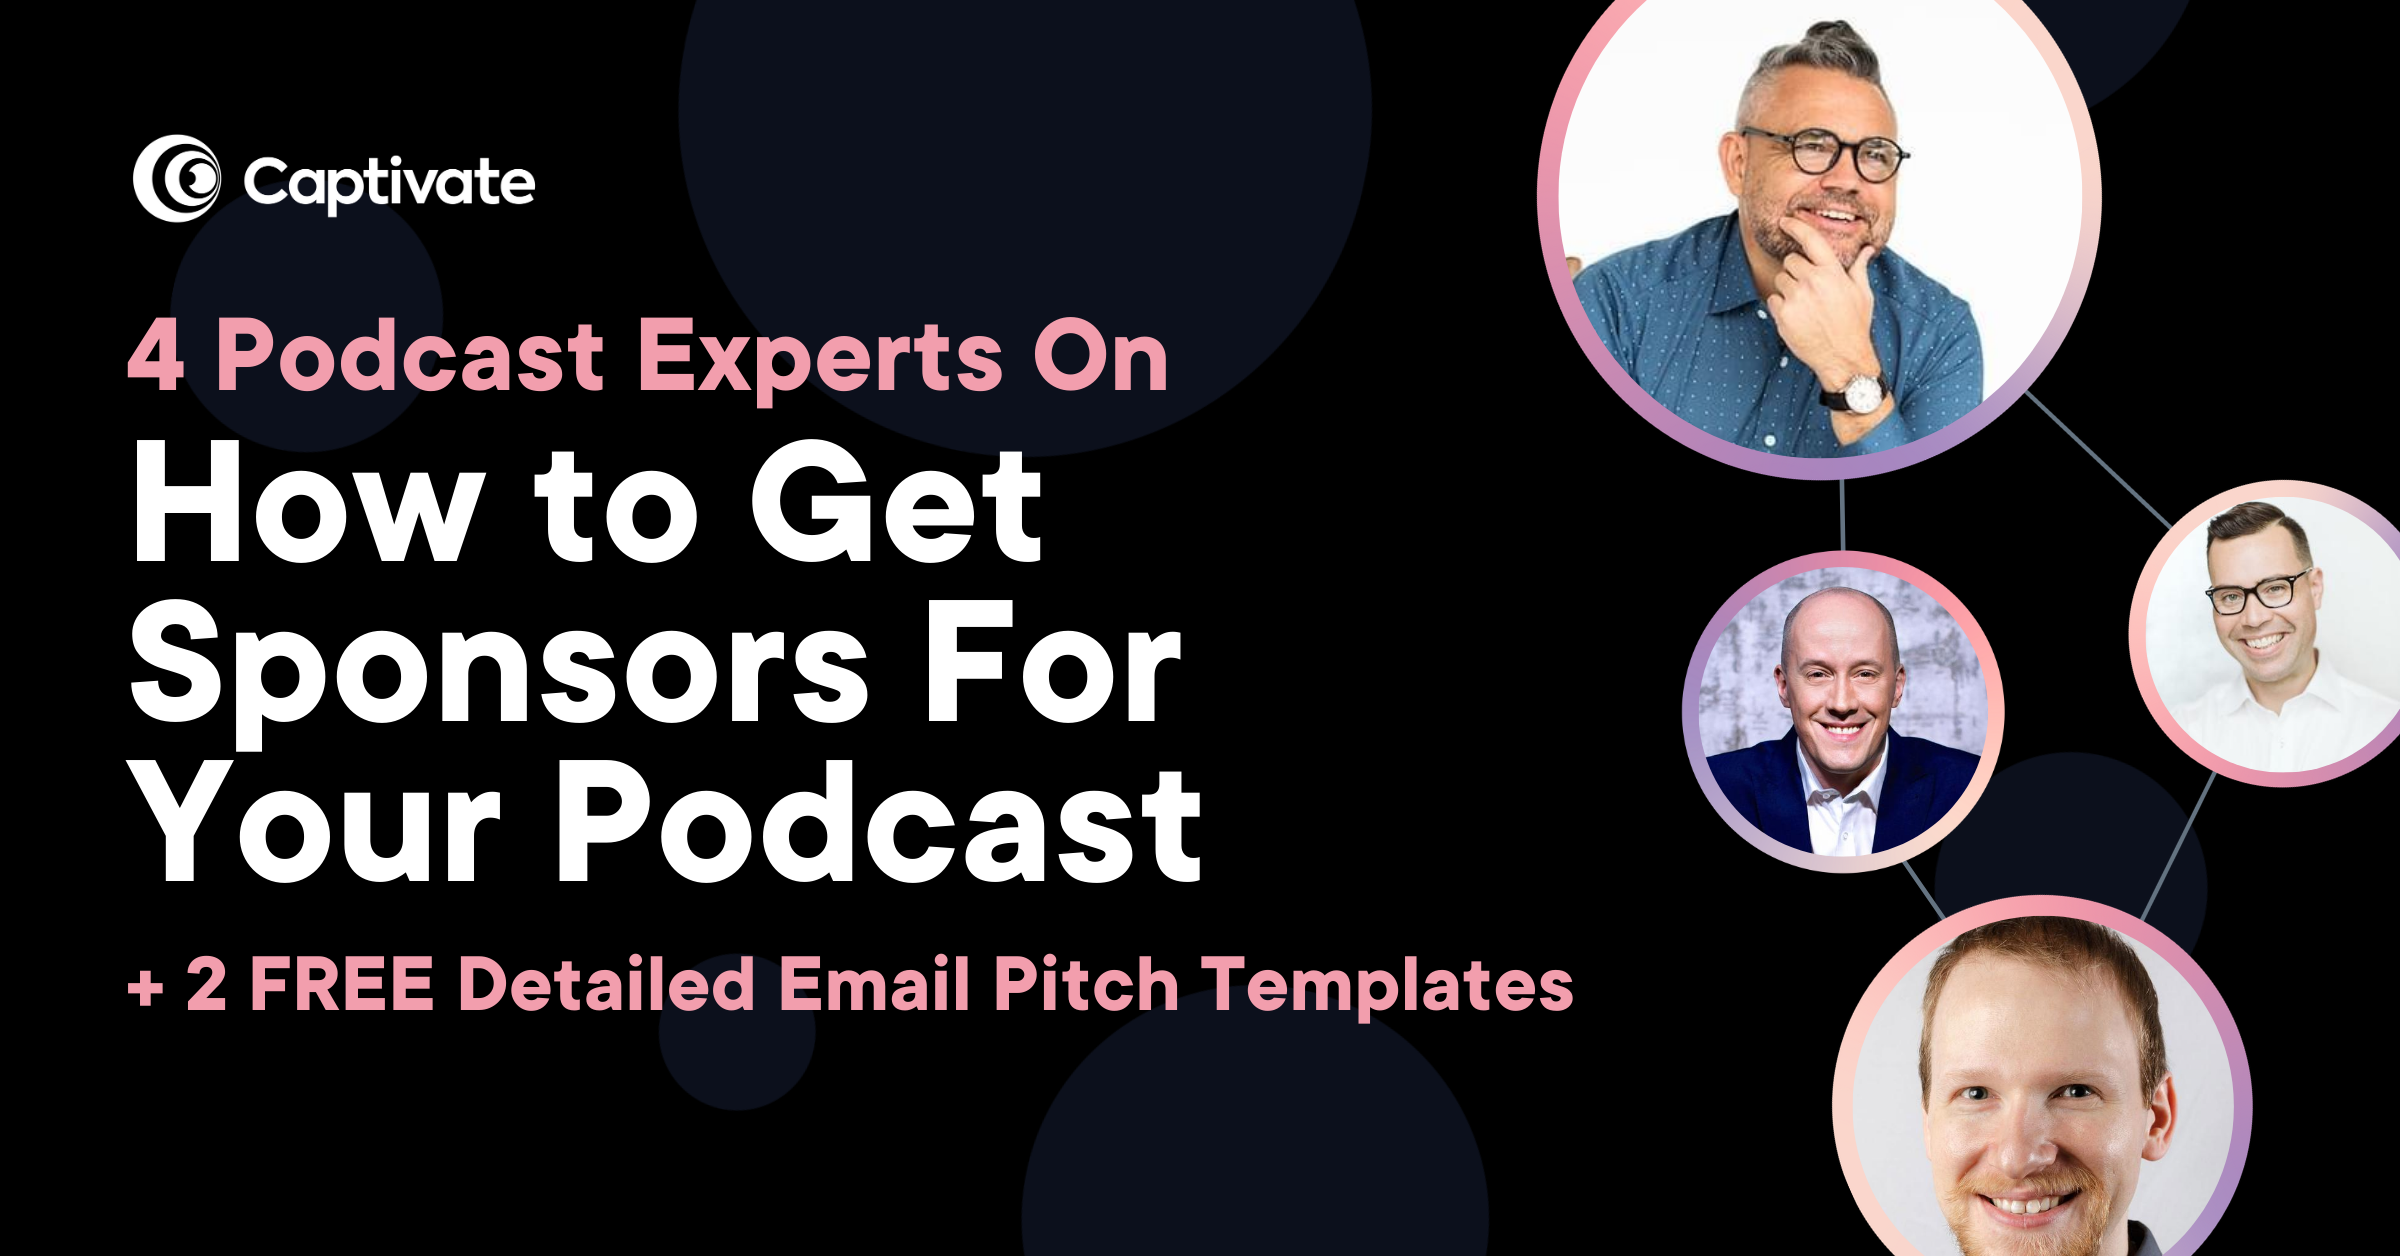 Featured Image: 4 Experts On How to Get Sponsors For Your Podcast plus Free Download of 2 Email Pitch Templates